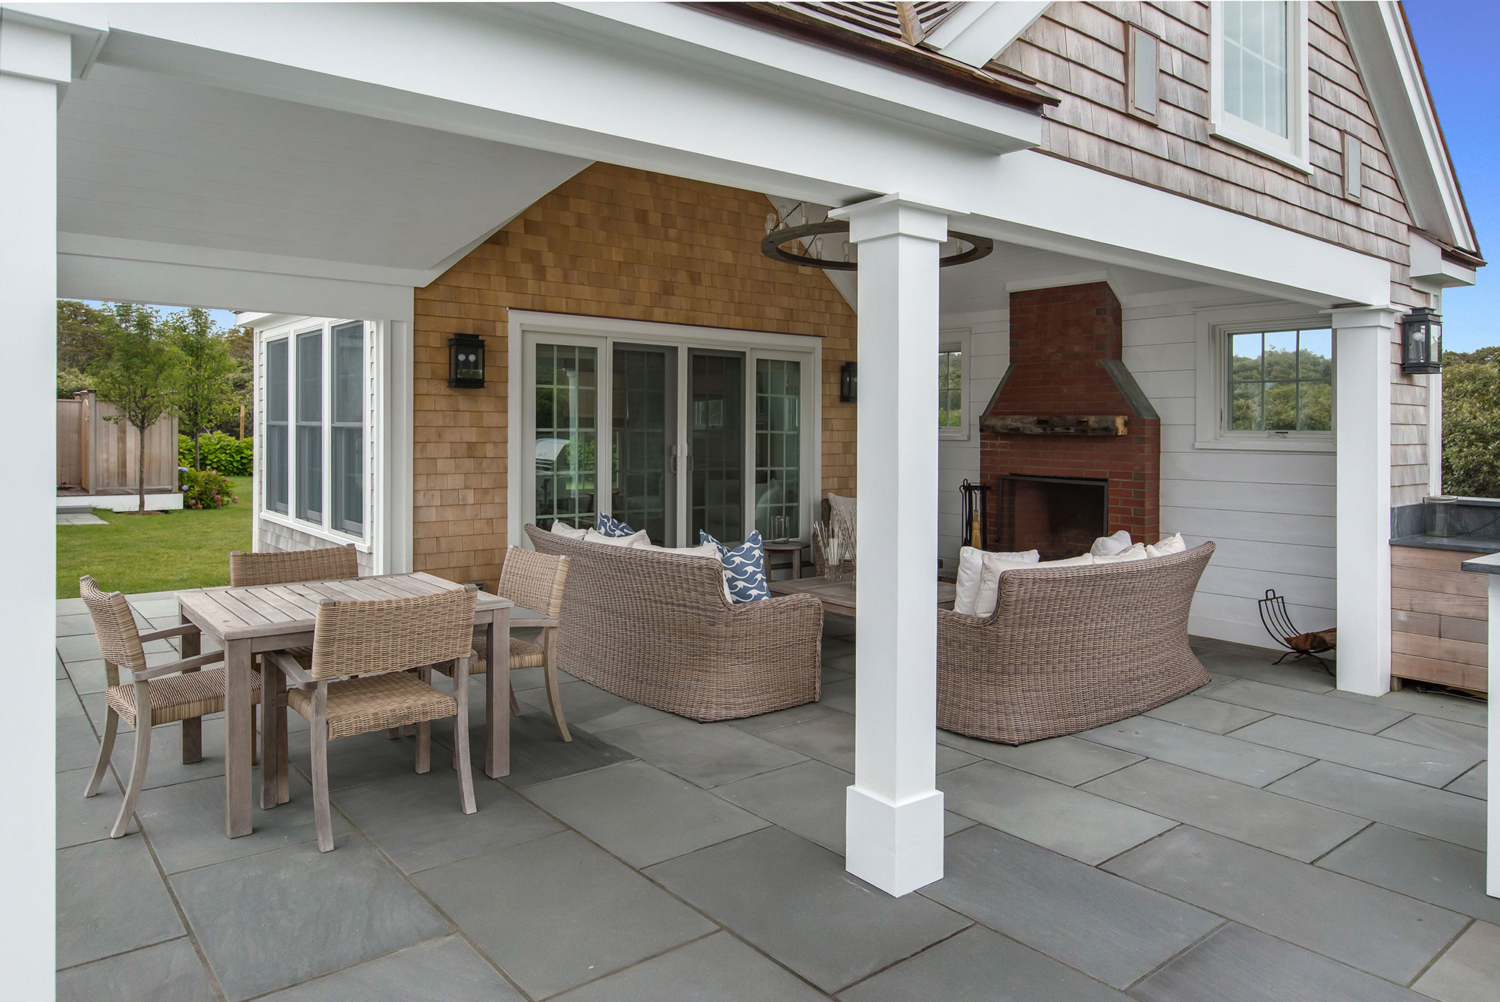 Nantucket Outdoor Living Built by Carey Company